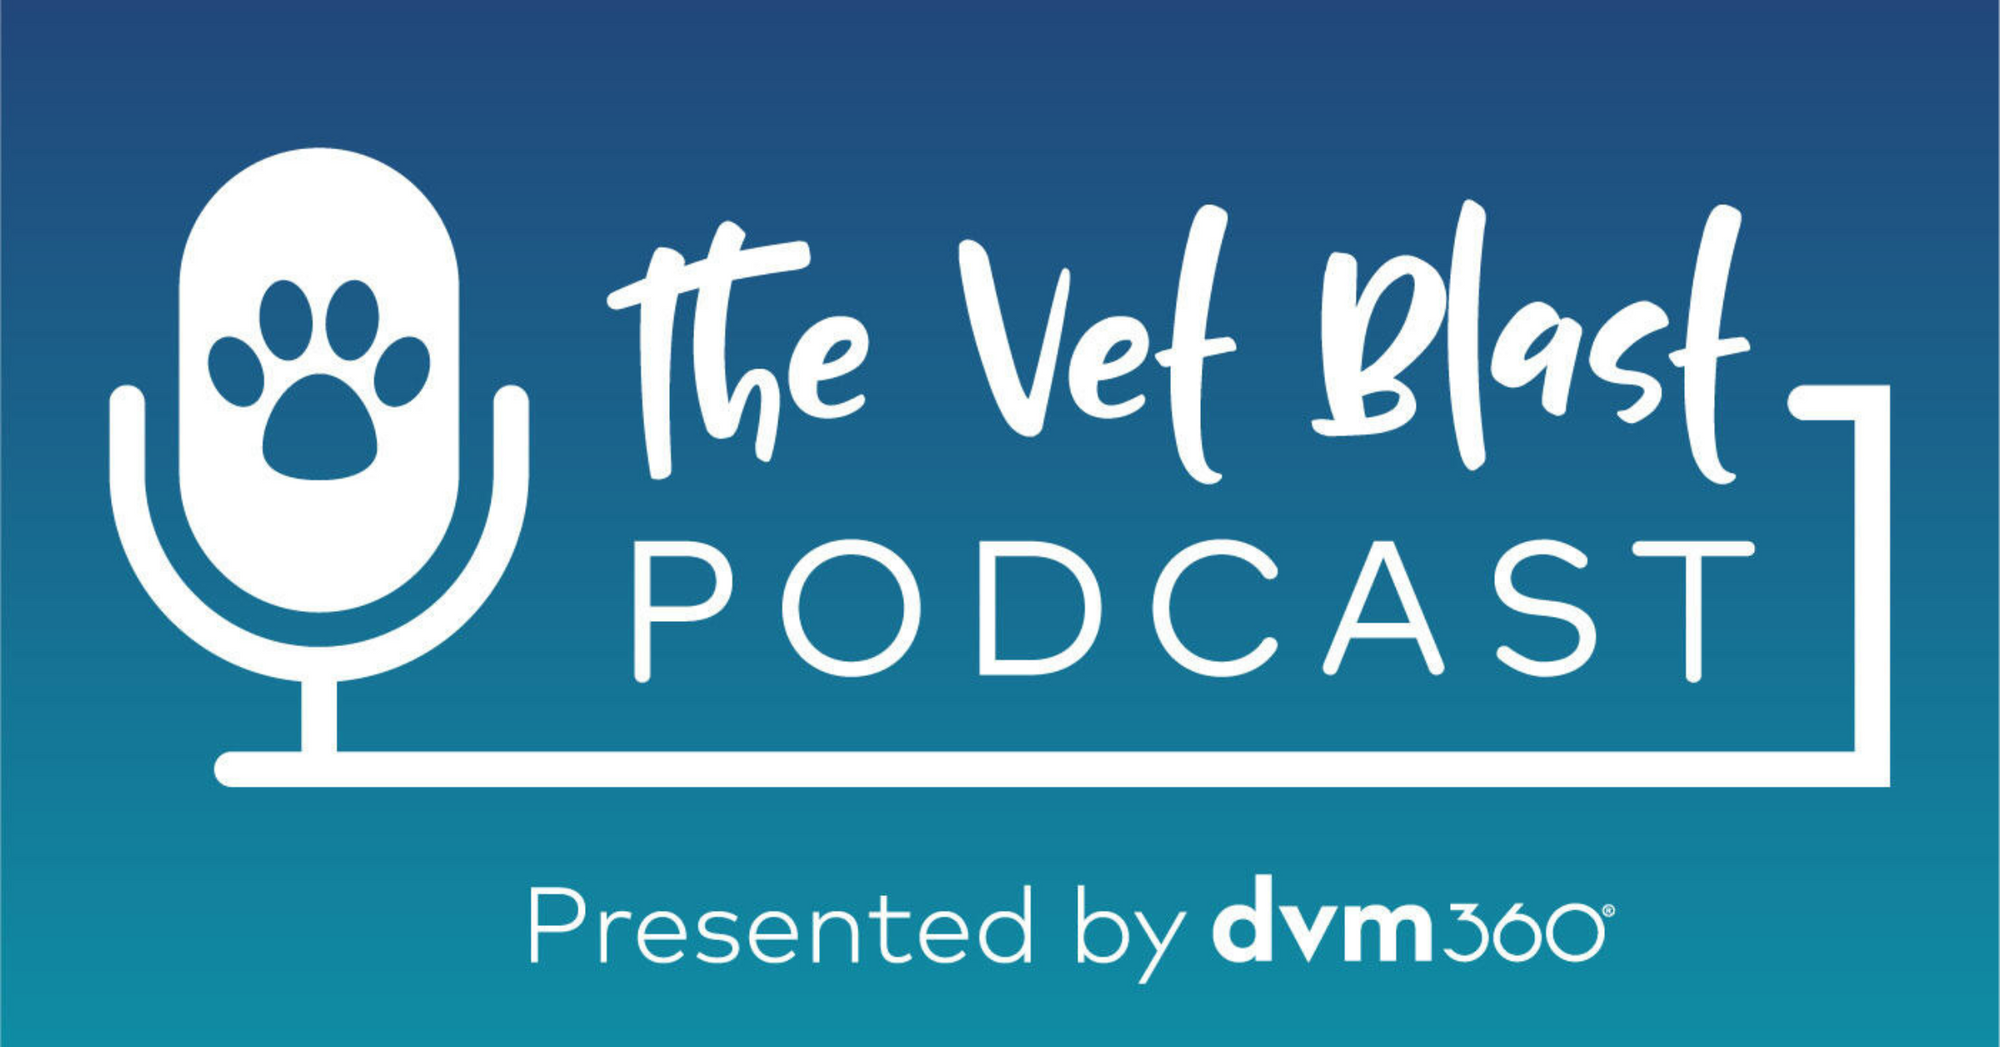 Top dvm360 podcasts of 2022: #2